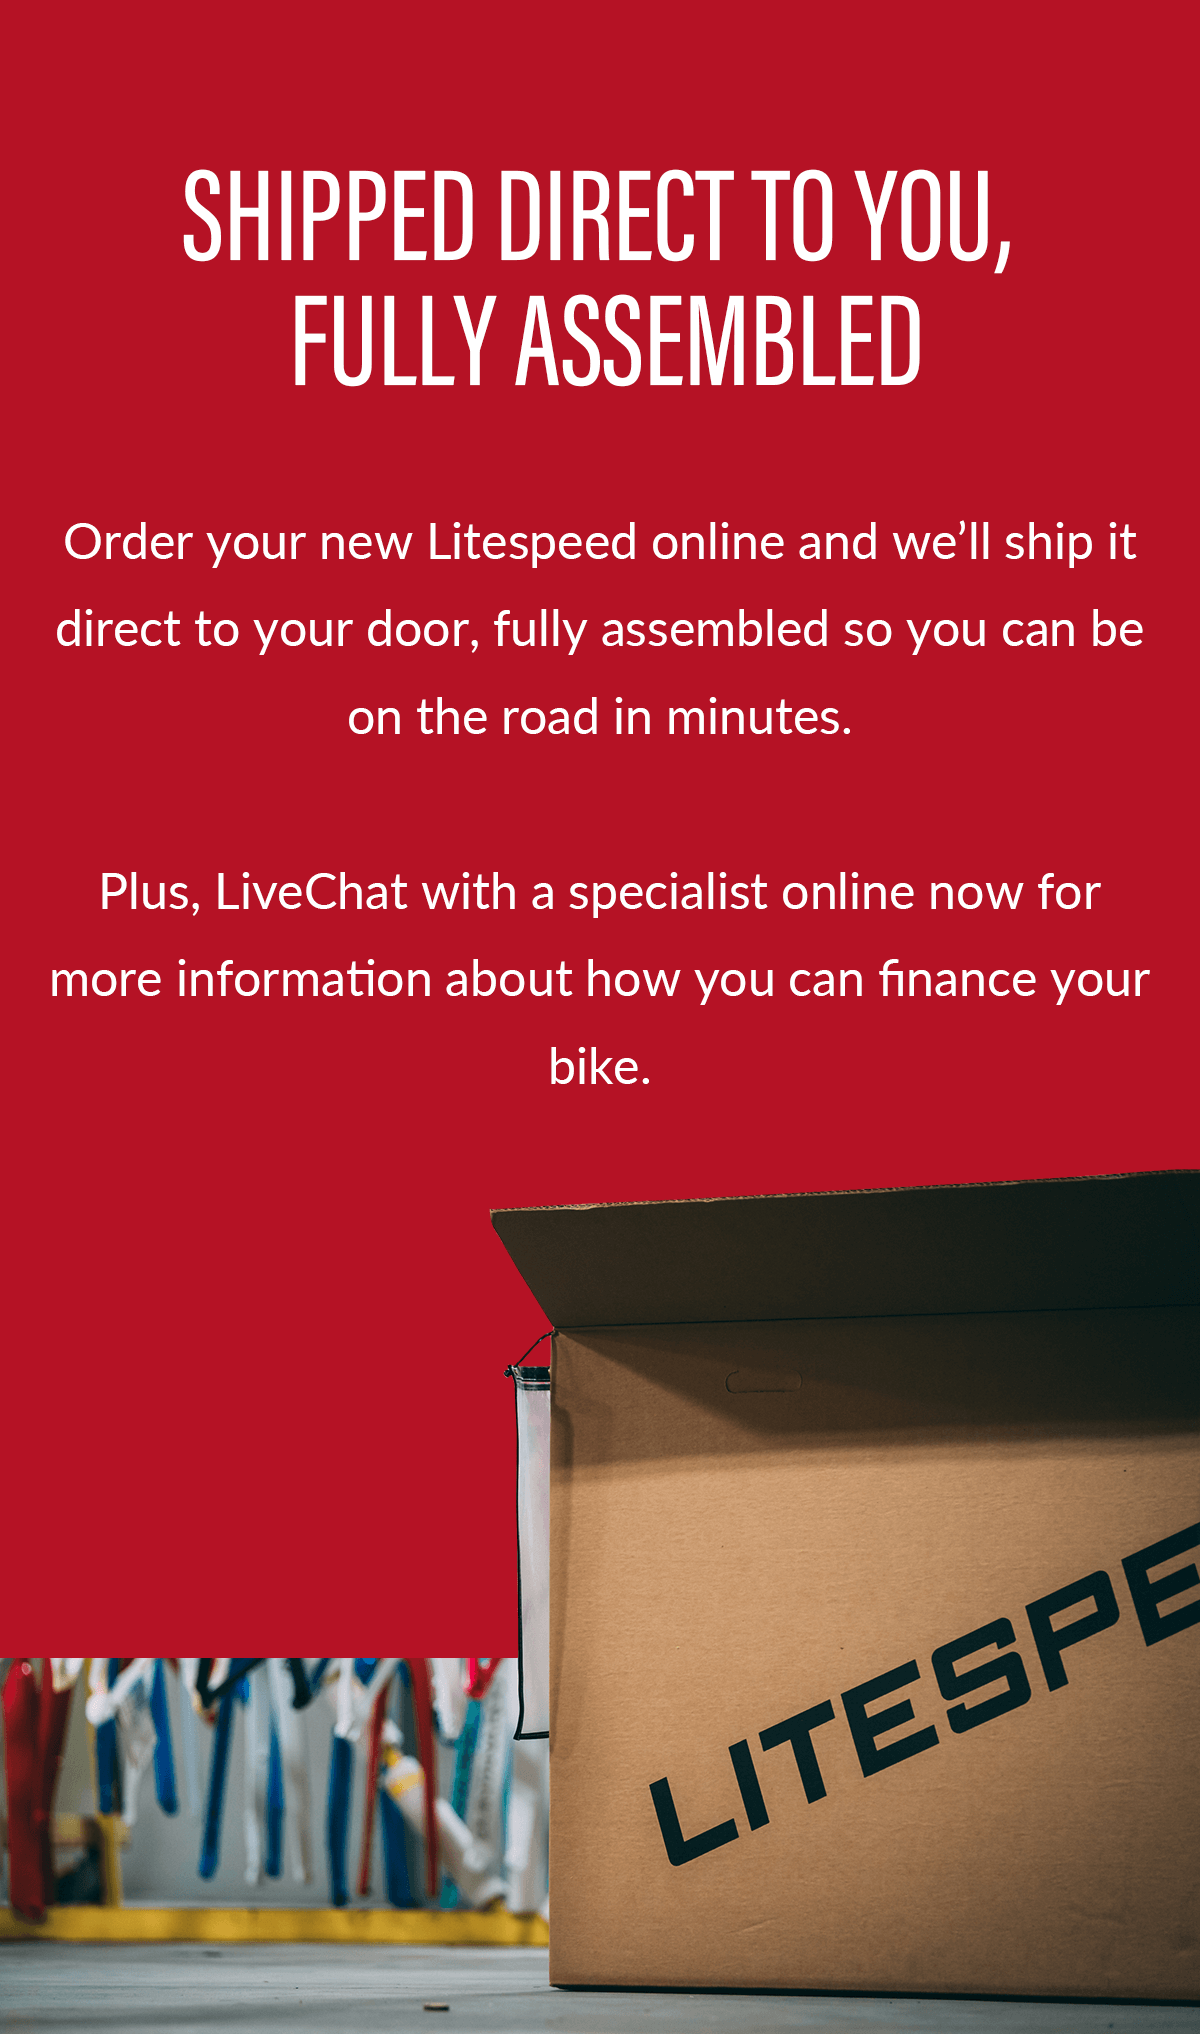 Order your new Litespeed online and we'll ship it direct to your door, fully assembled so you can be on the road in minutes. Plus, ask about financing options for your new bike.